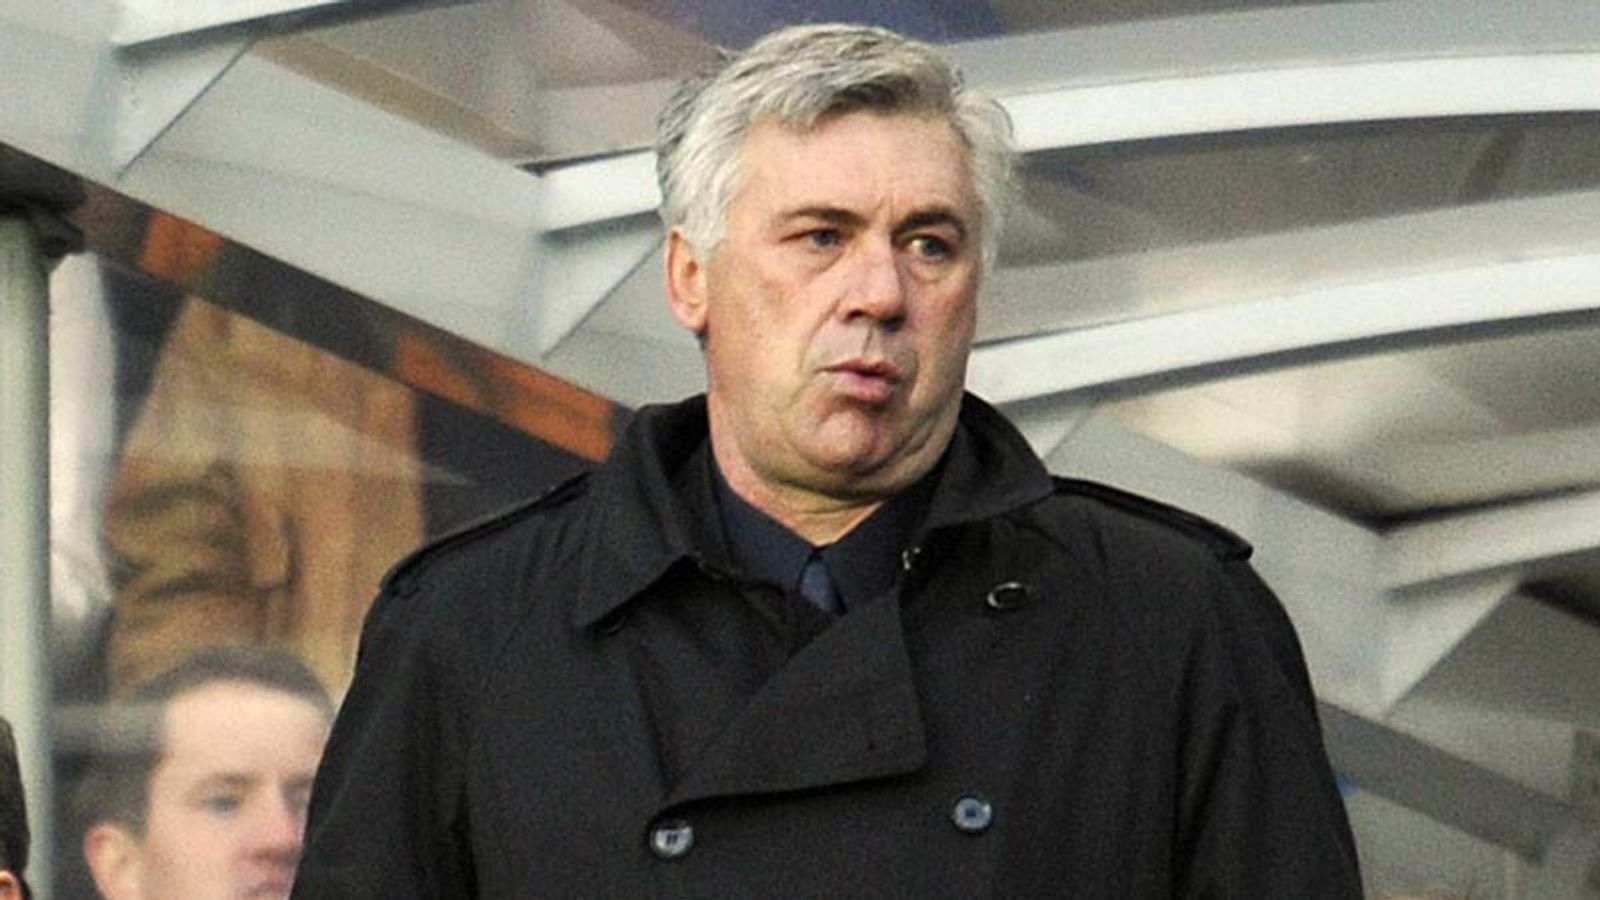 Ancelotti Talks about the VAR Decision to Not Give a Red Card to Bednarek